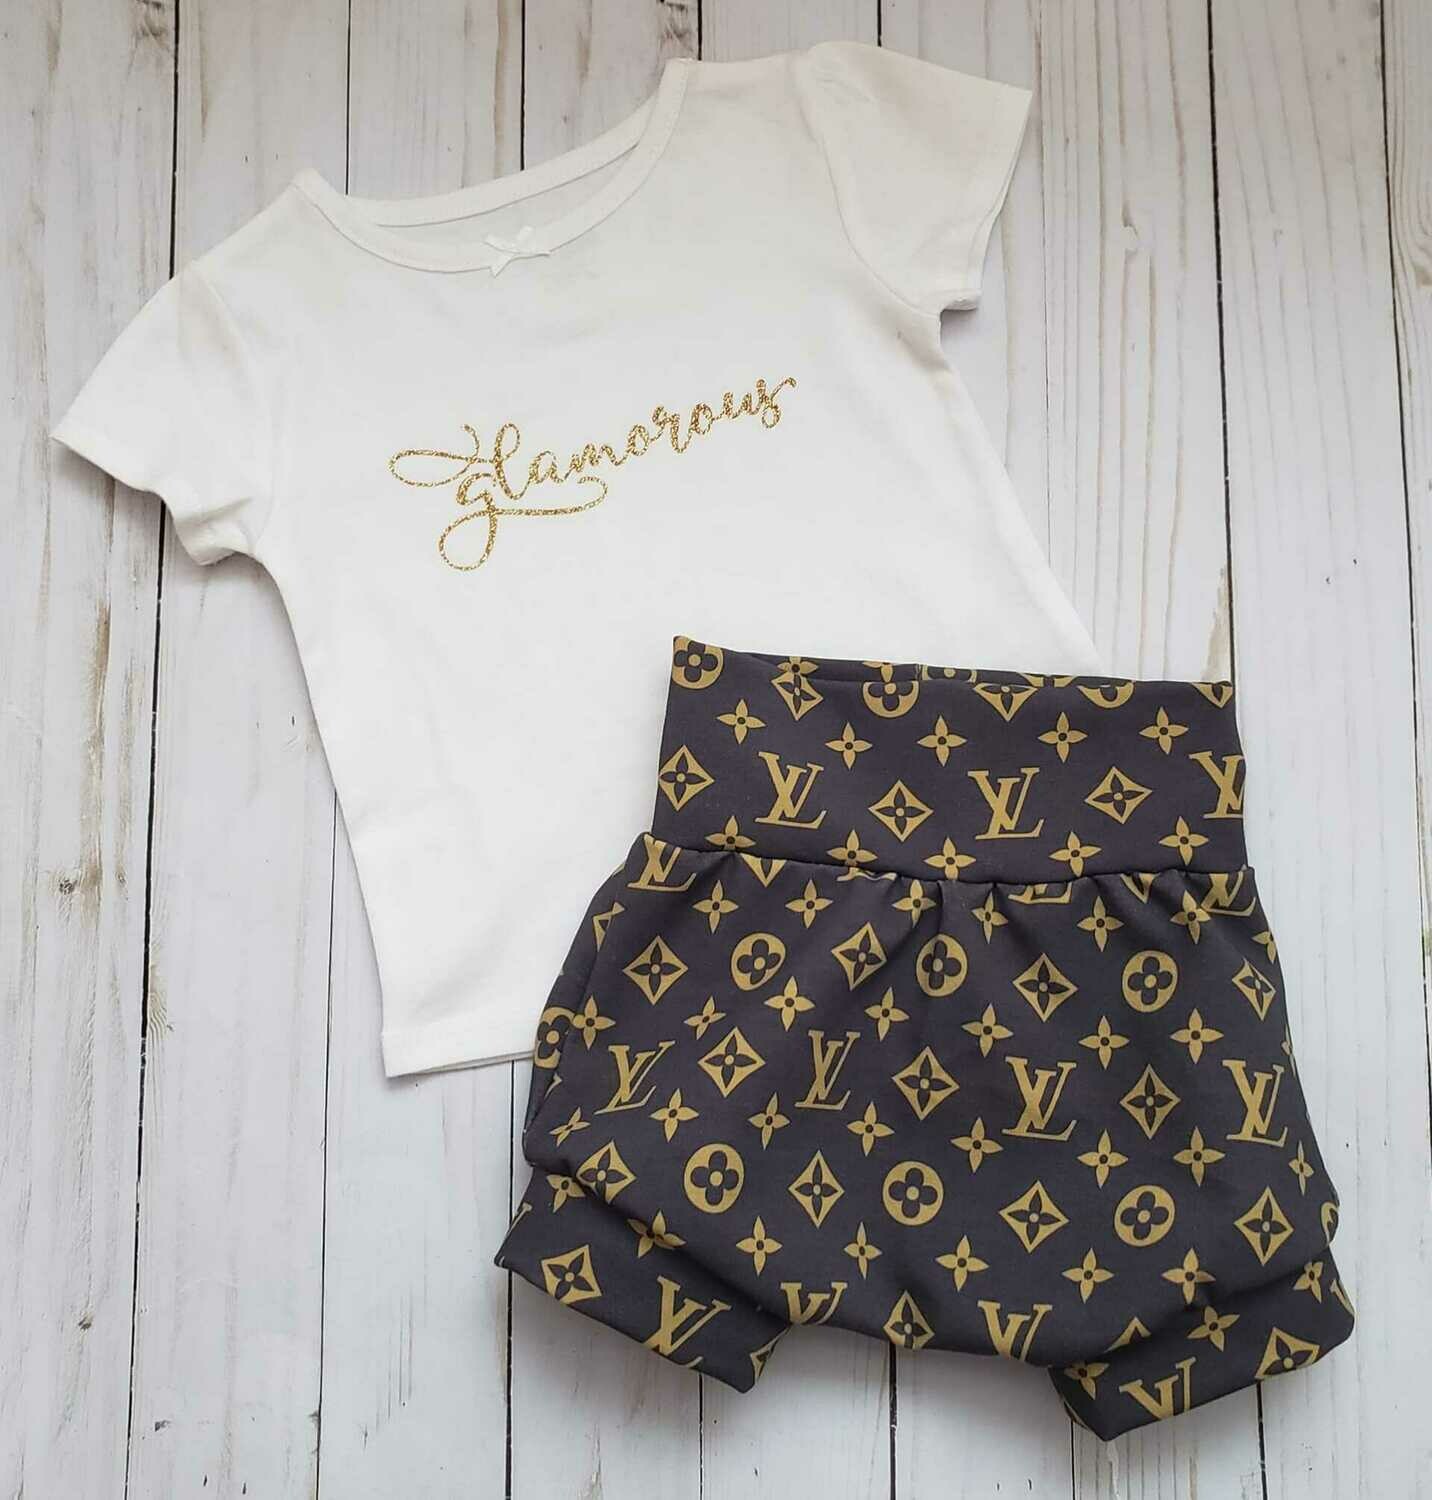 Louis Vuitton bummies & t-shirt or onesie set - available in sizes 0-3  months - 4T